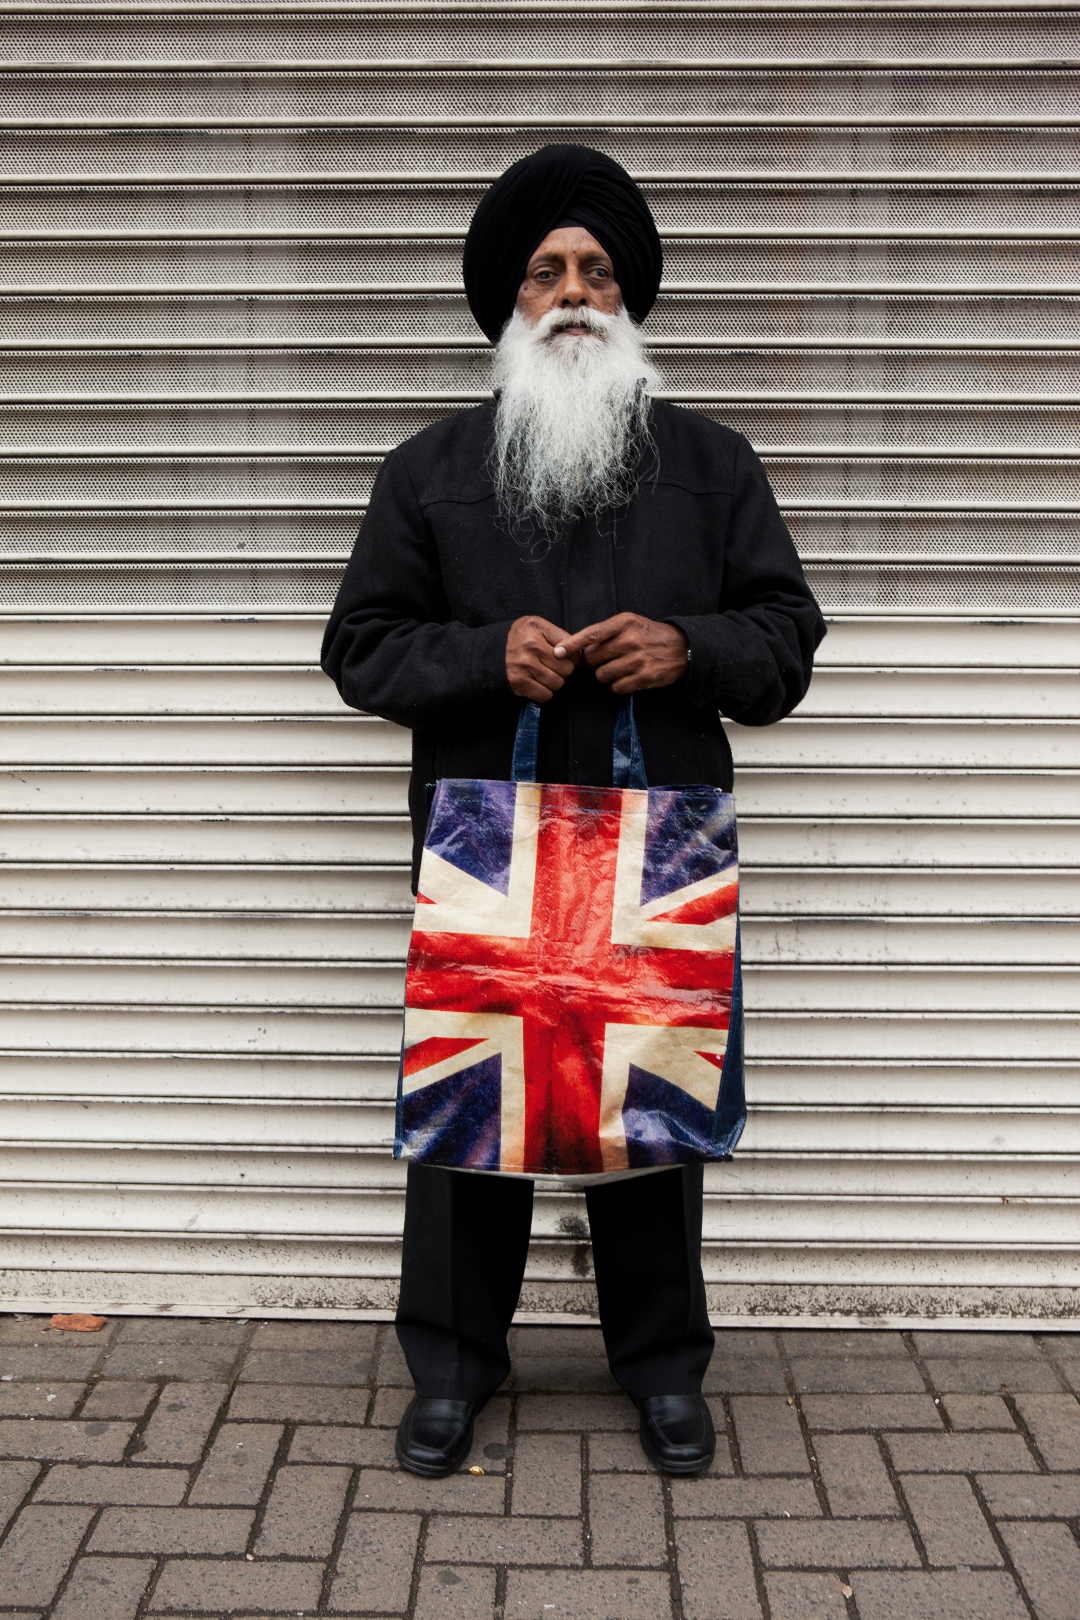 Harbhajan Singh, Willenhall Market, Walsall, the Black Country, England, 2011, by Martin Parr